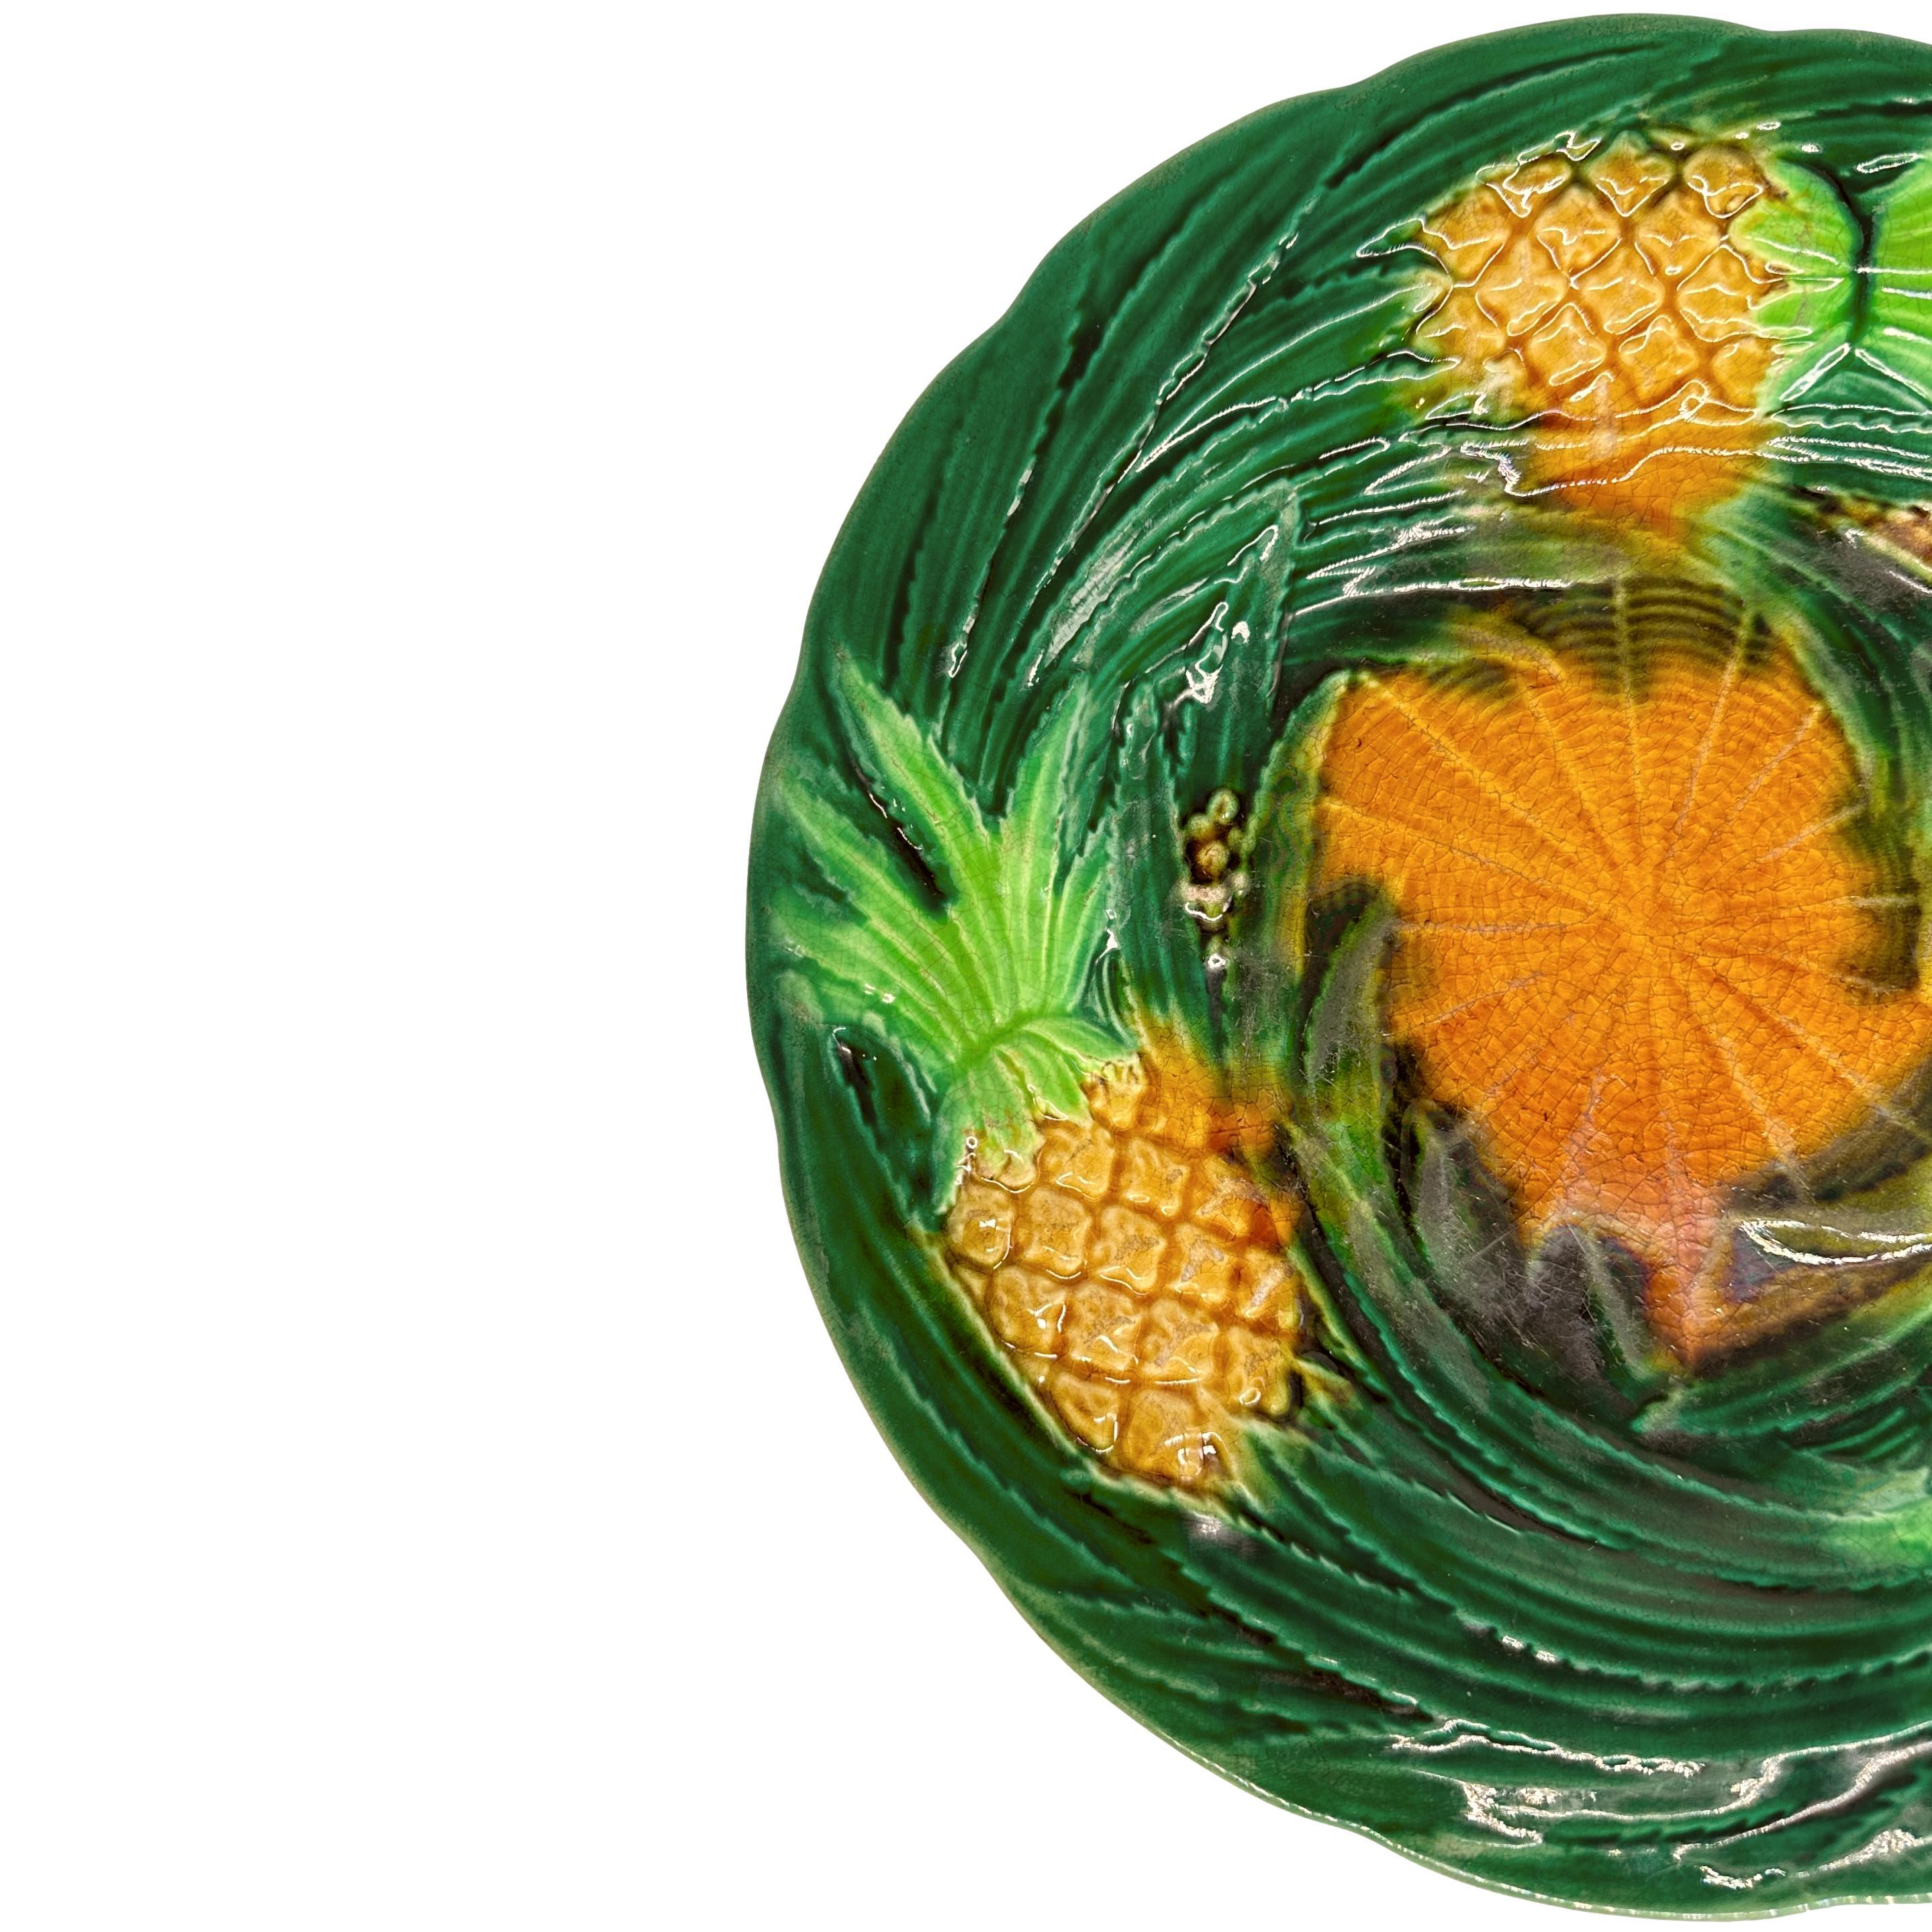 A George Jones Majolica Dessert Plate, with relief-molded pineapples and swirling green-glazed leaves, the center with yellow ocher-glazed simulated basketweave, the reverse impressed with the earliest GJ monogram (rarely seen), English, ca. 1870. 